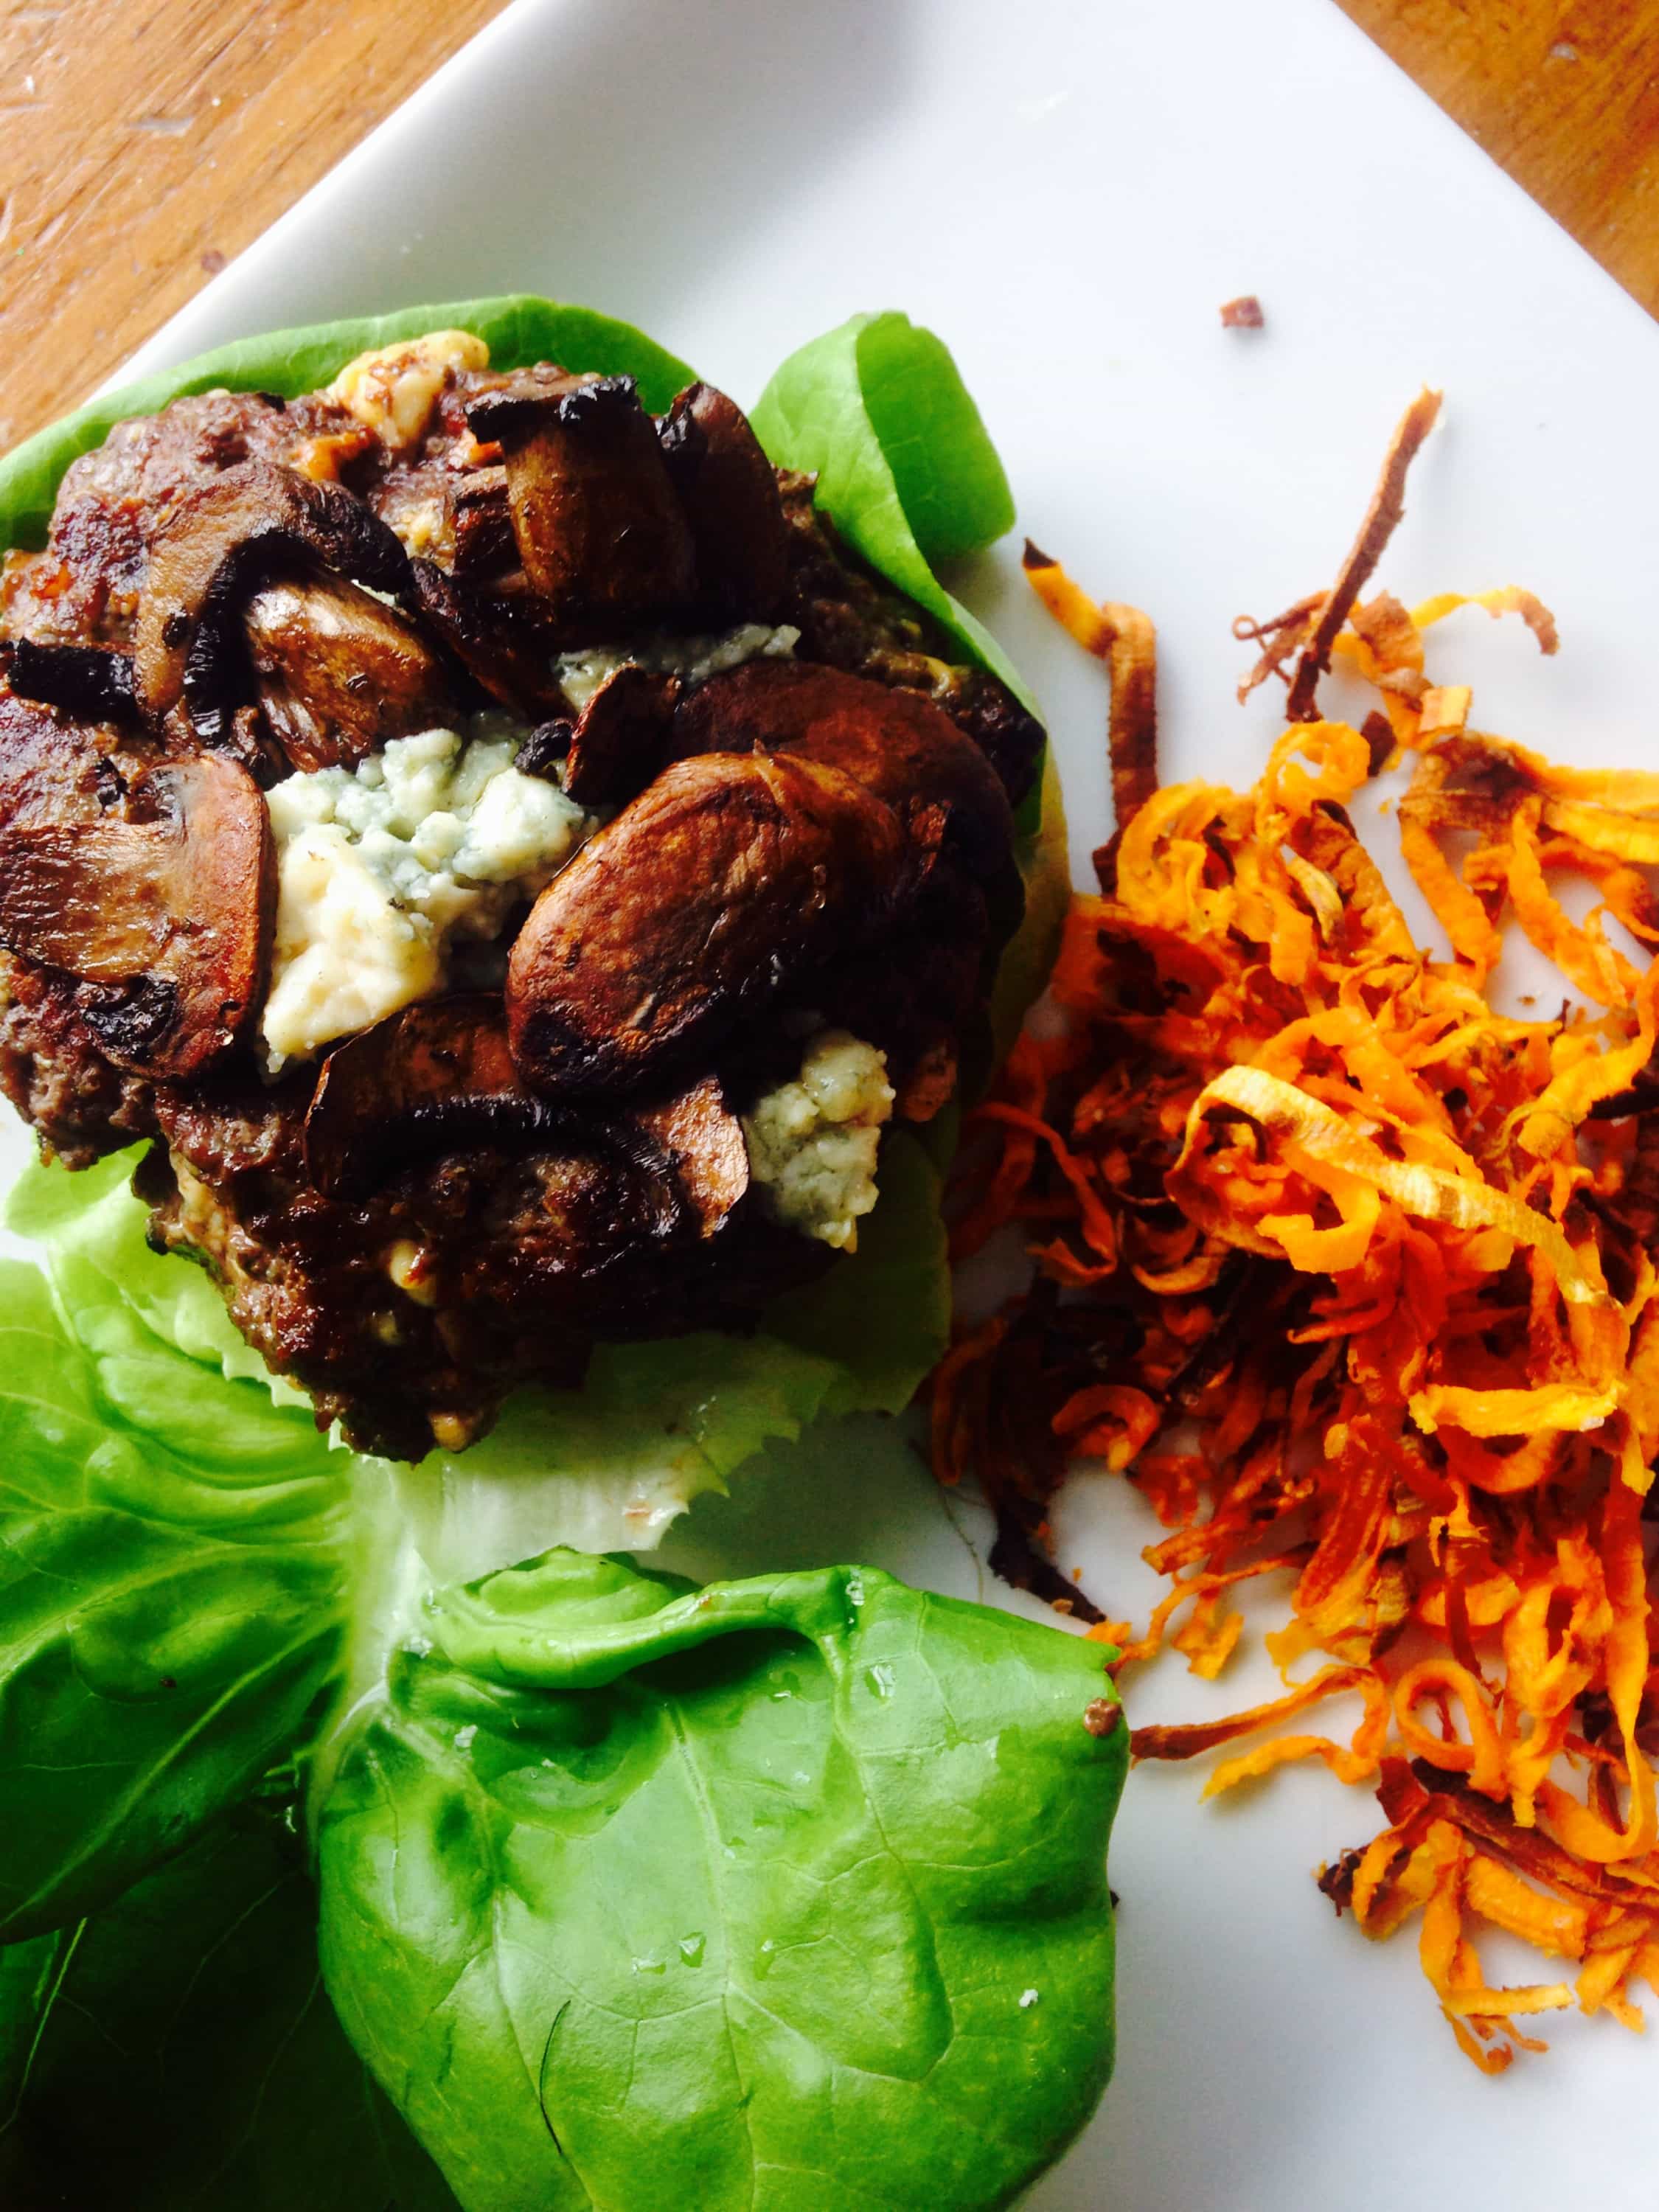 Blue cheese stuffed cheeseburger topped with mushrooms on a lettuce wrap "bun" plated with shoestring sweet potato fries.